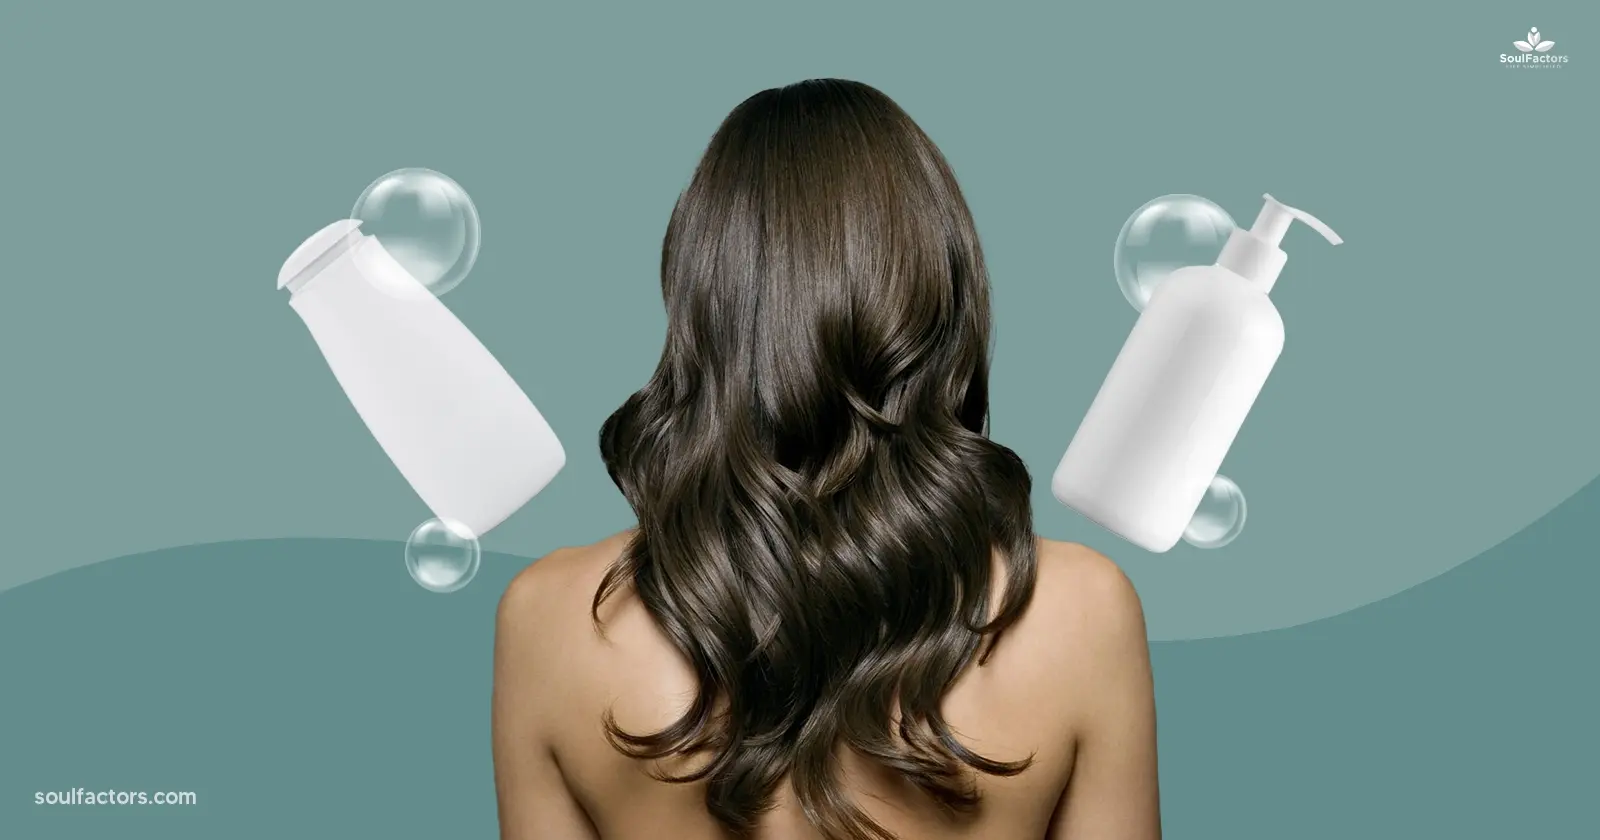 Best Shampoo For Wavy Hair - Feature